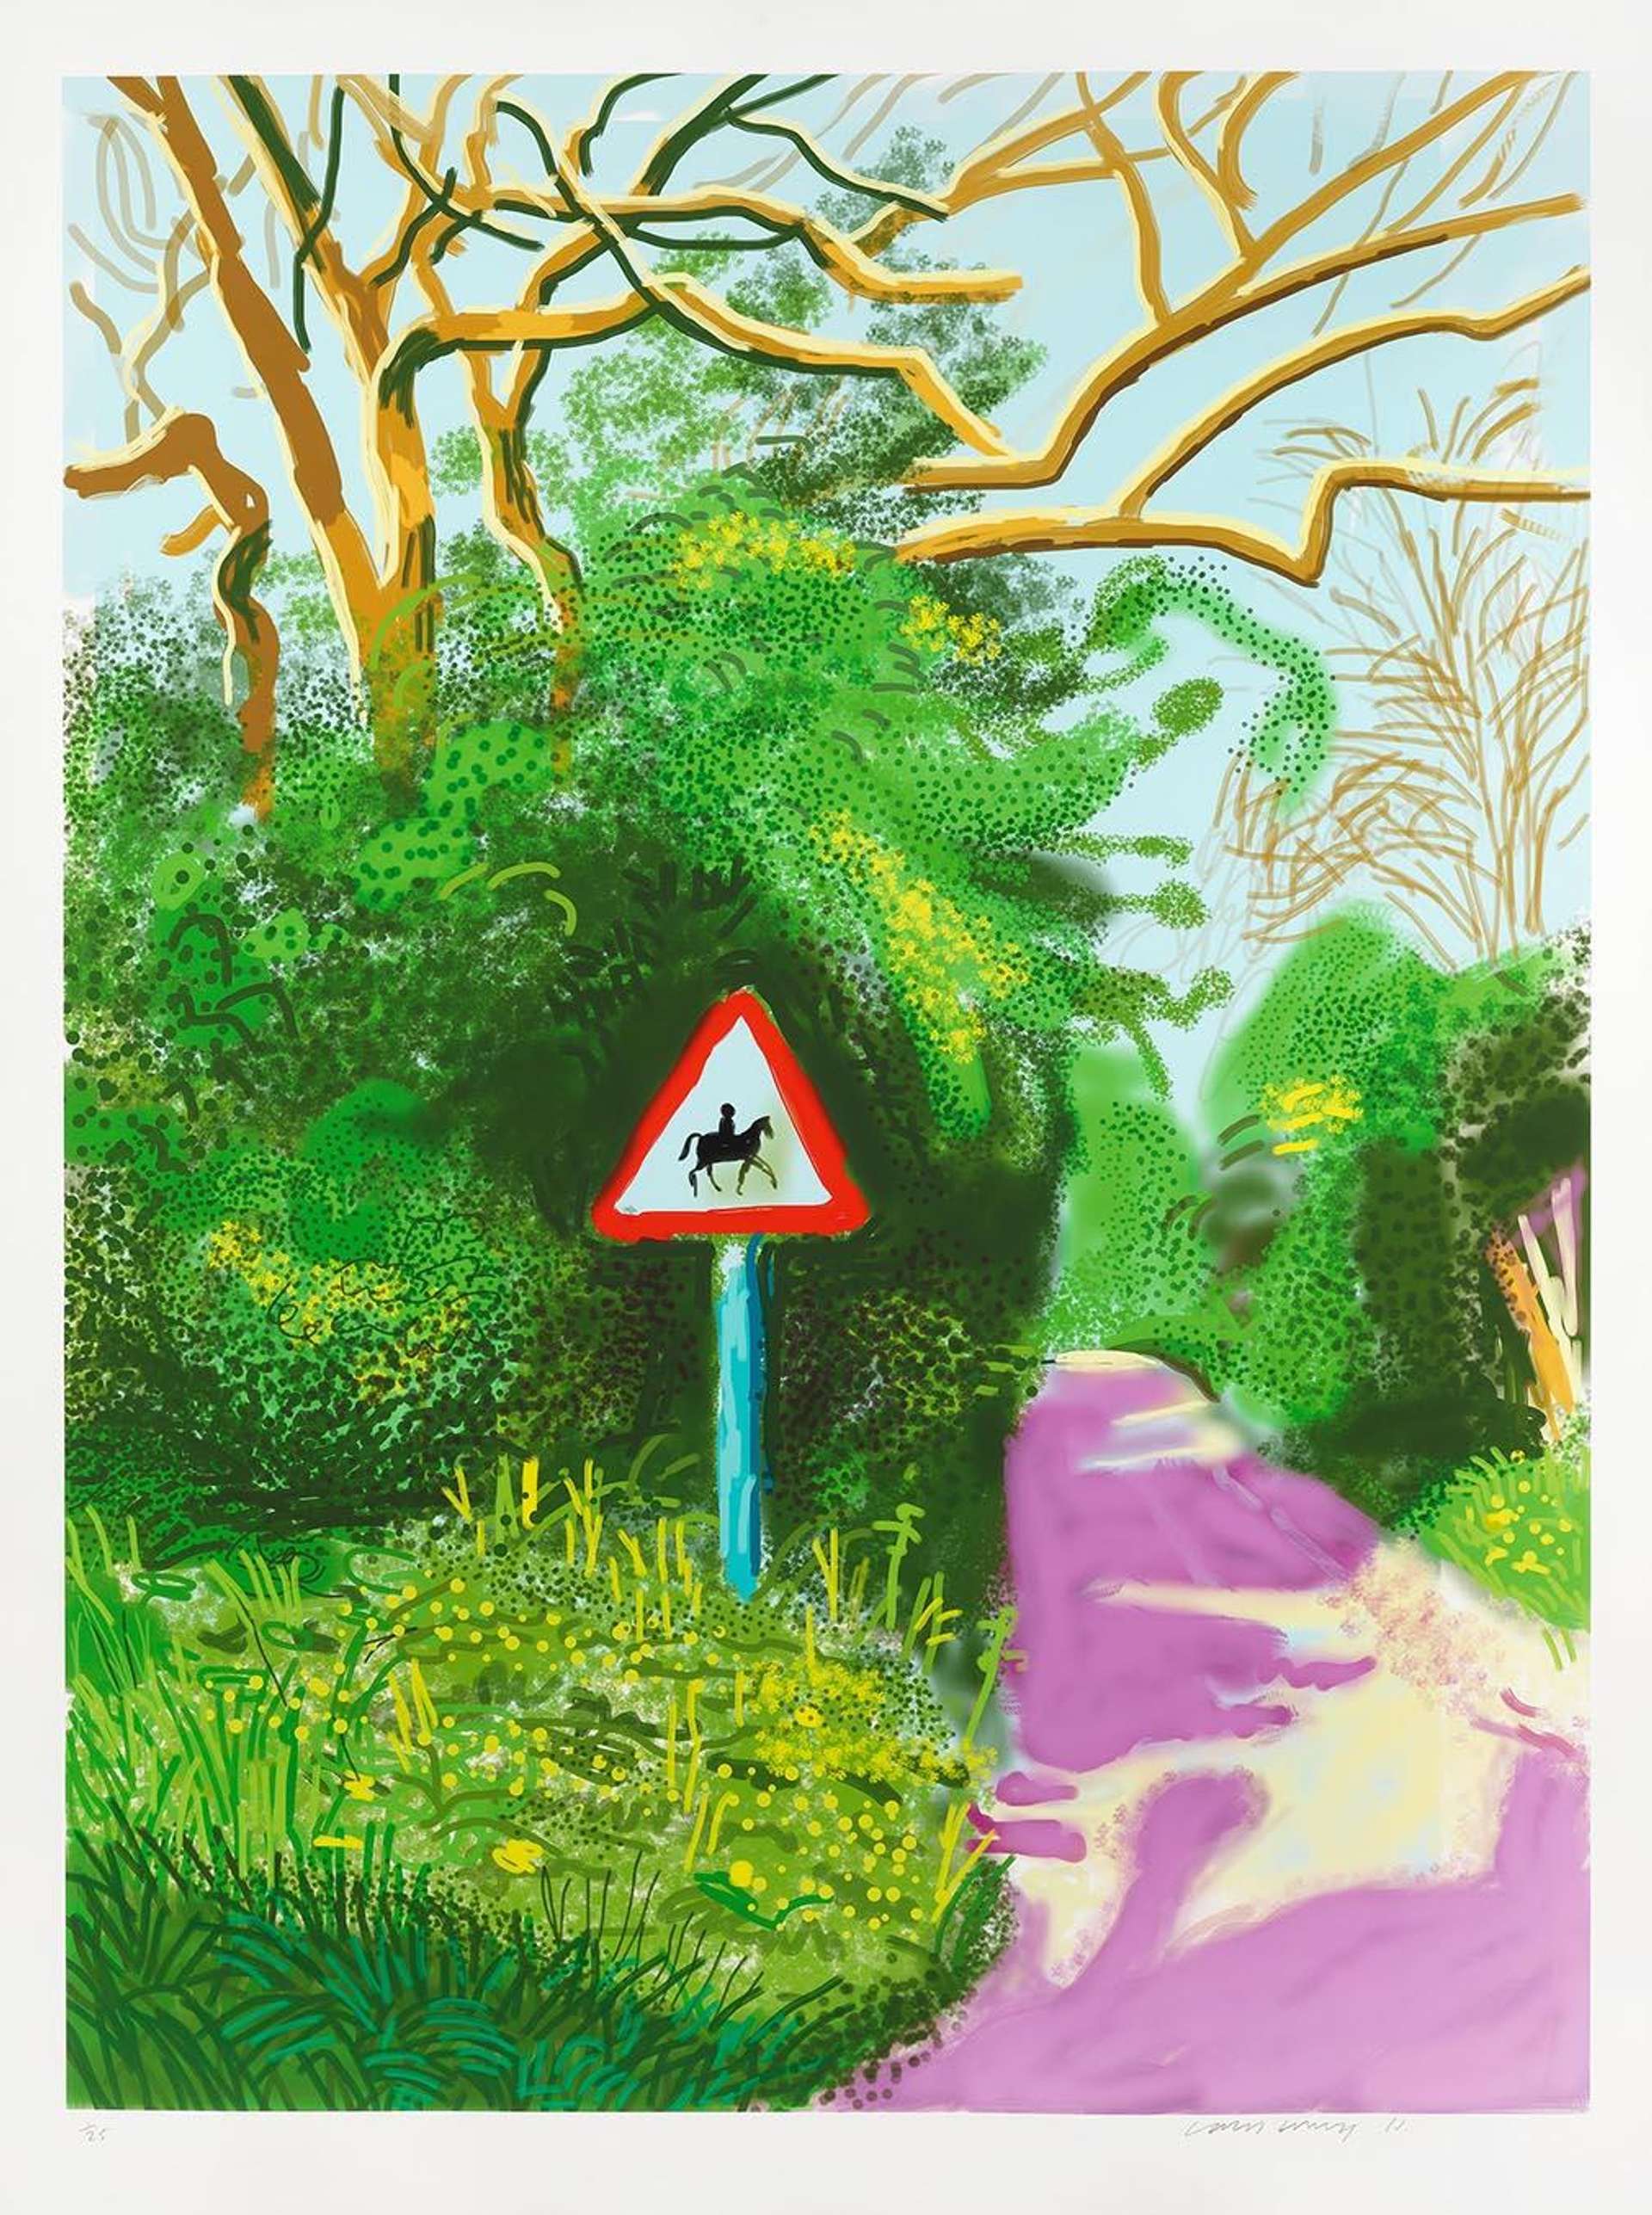 An iPad drawing by David Hockney depicting a pink road linked by green foliage, with a road sign in the middle of the composition.